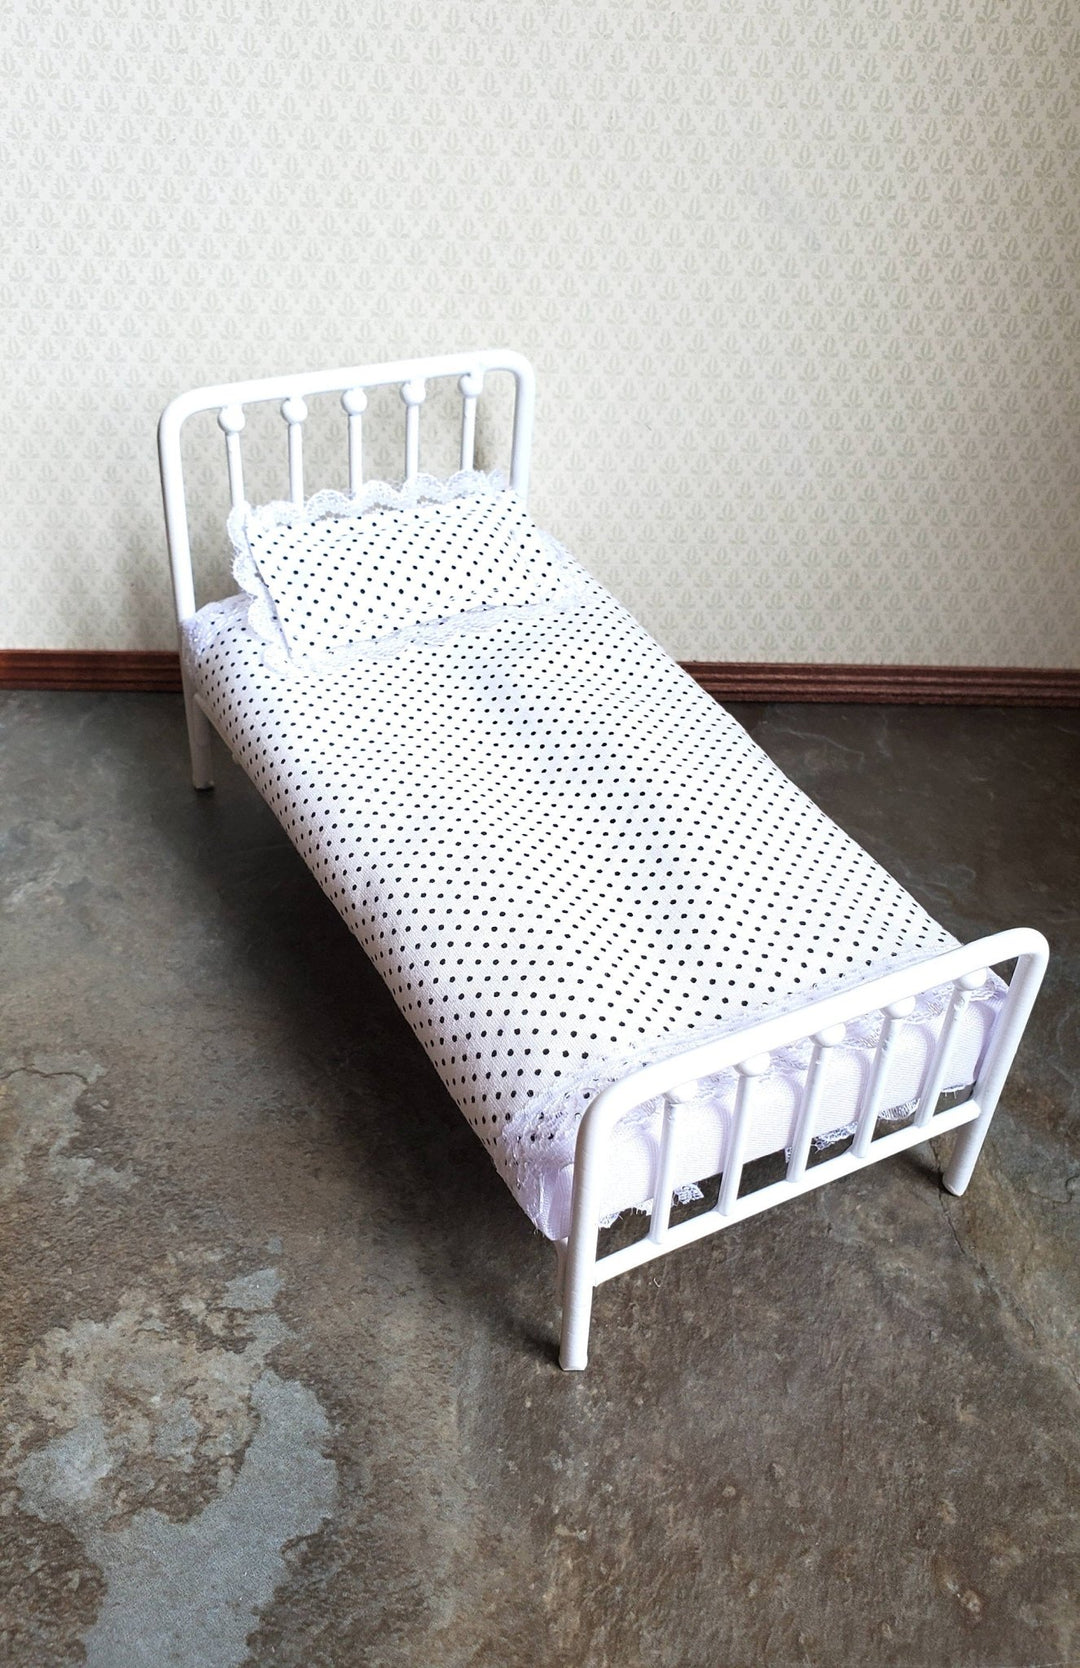 Dollhouse Miniature Bed White Metal with Mattress Pillow Blanket 1:12 Scale Furniture - Miniature Crush